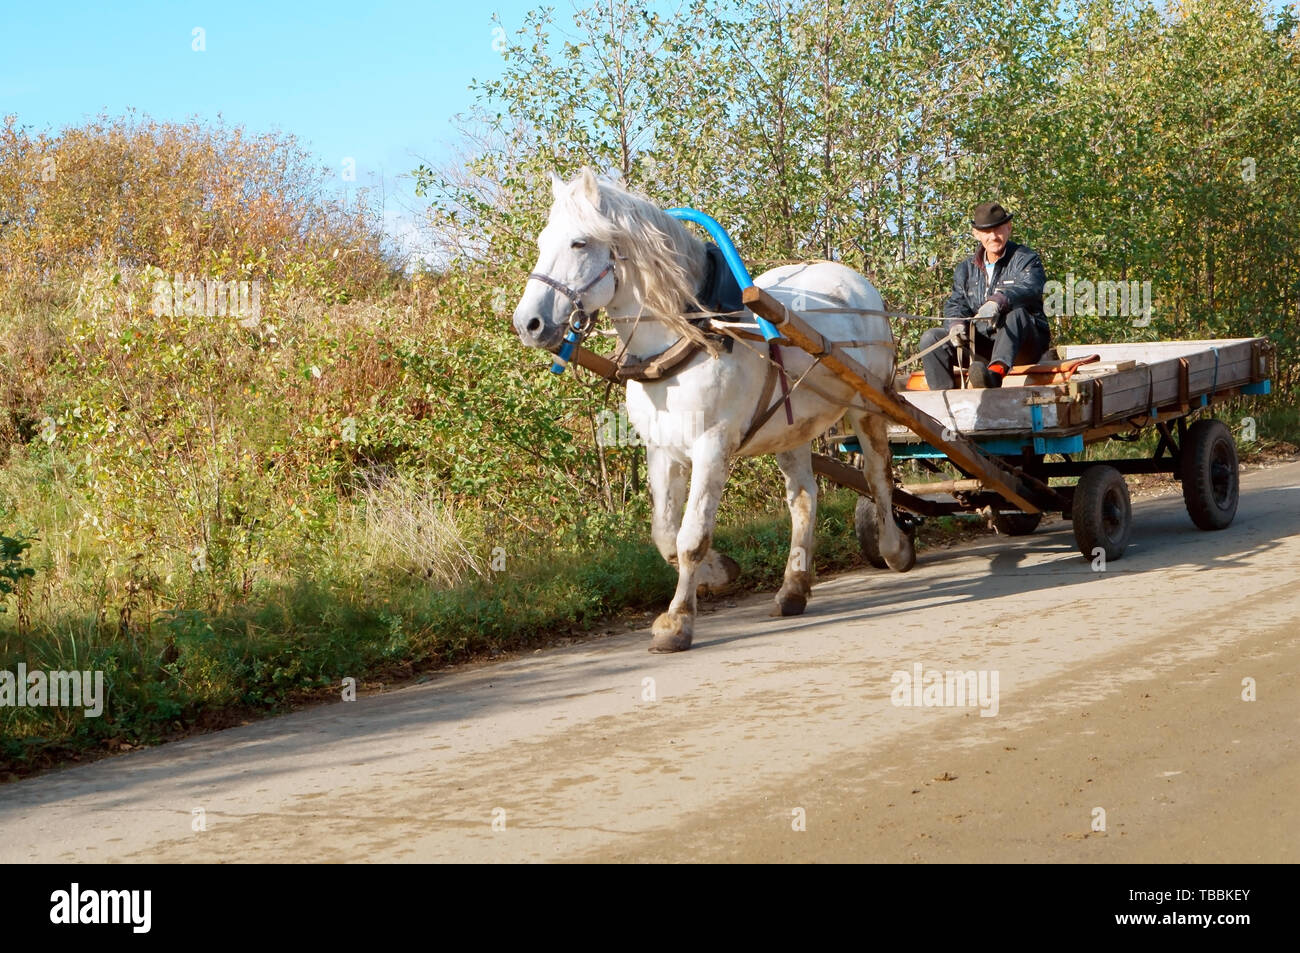 peasant on a horse cart, beautiful white horse with cart on the road, Kaliningrad region, Russia, October 21, 2019 Stock Photo